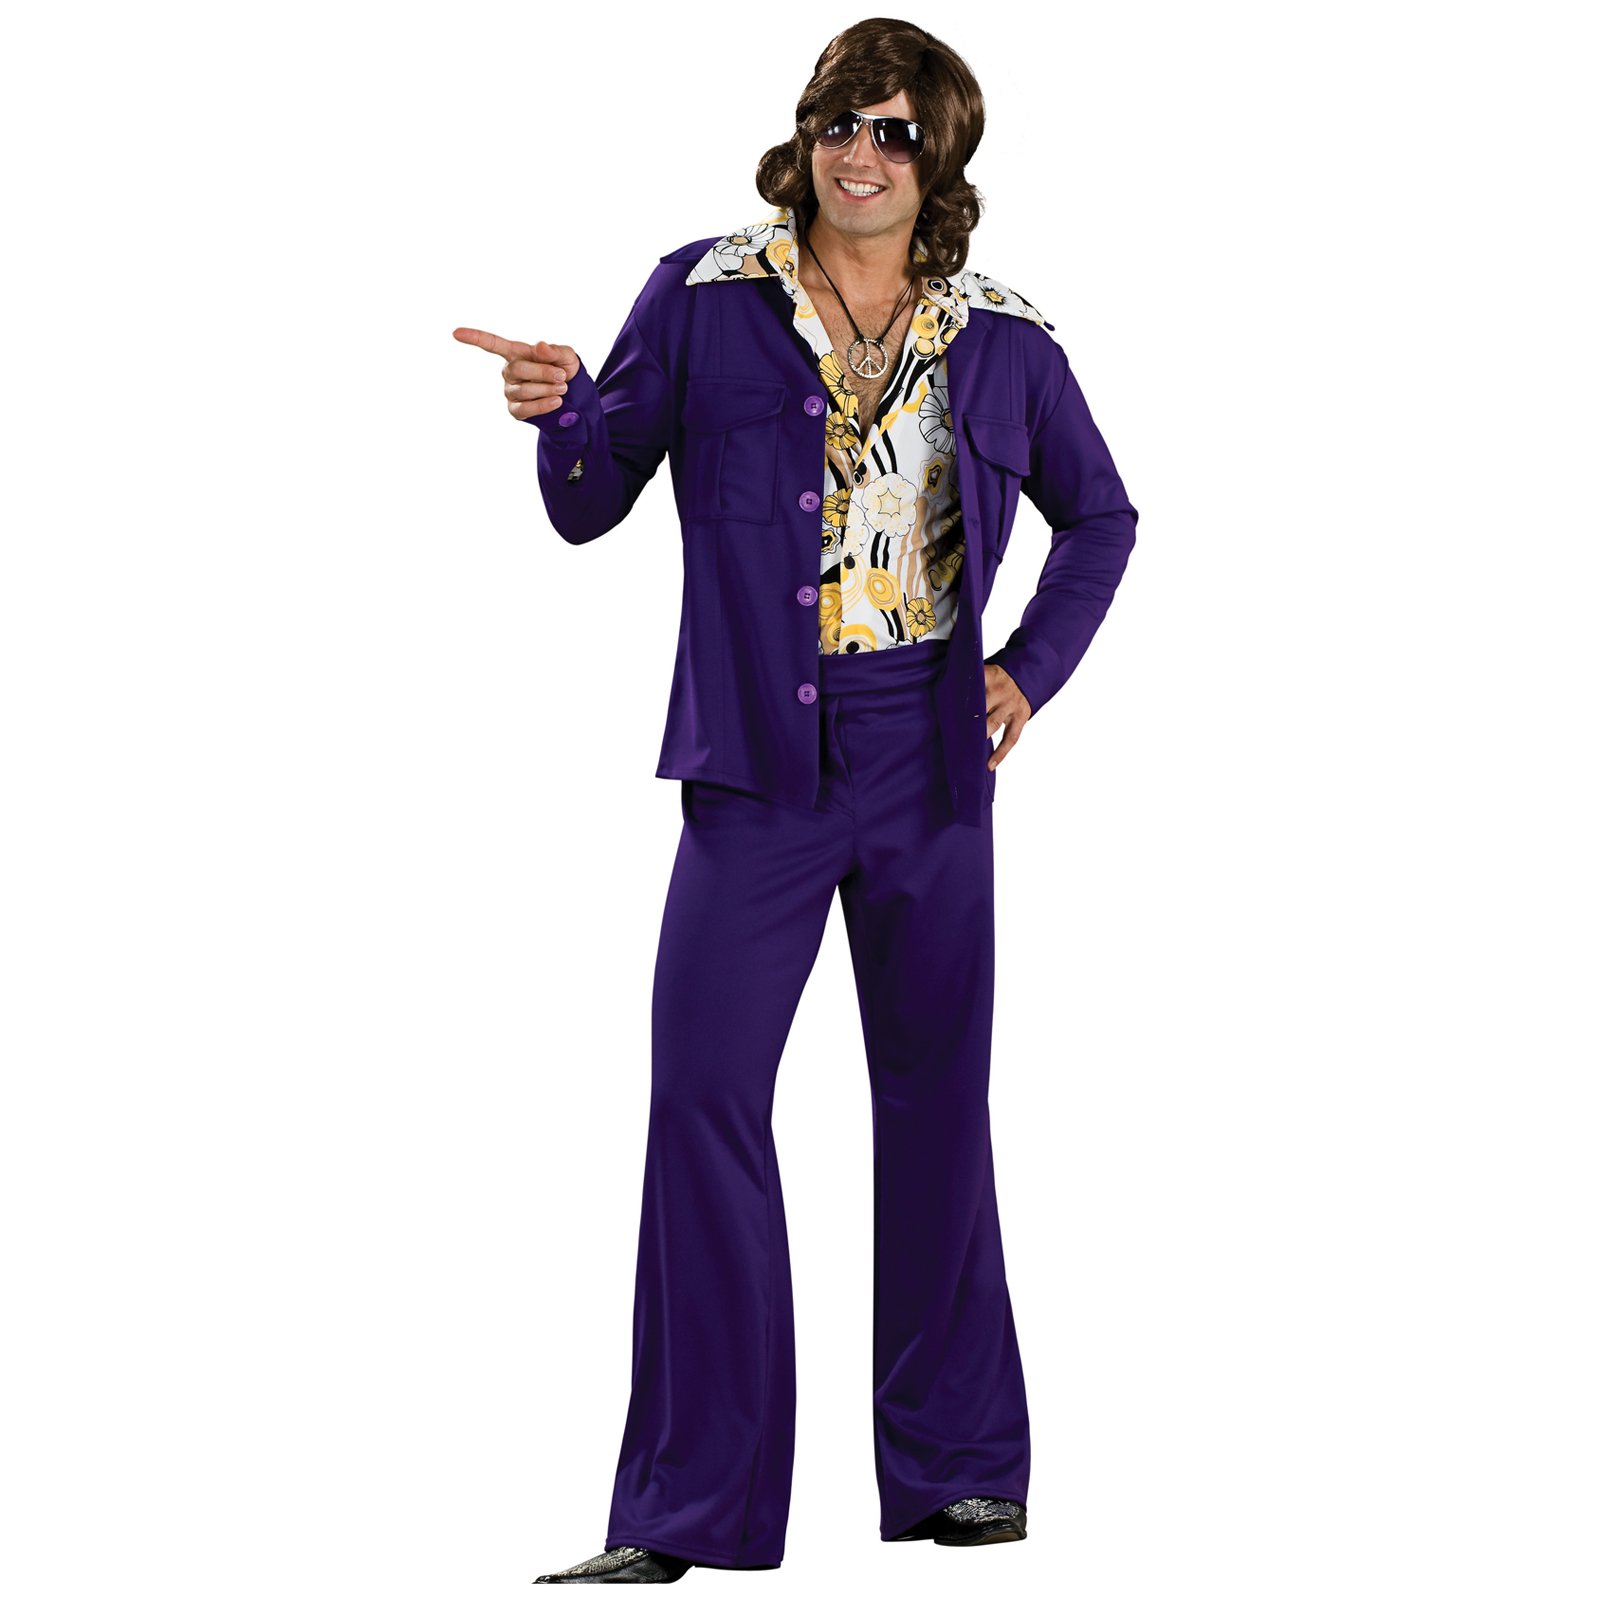 Is your website a leisure suit?